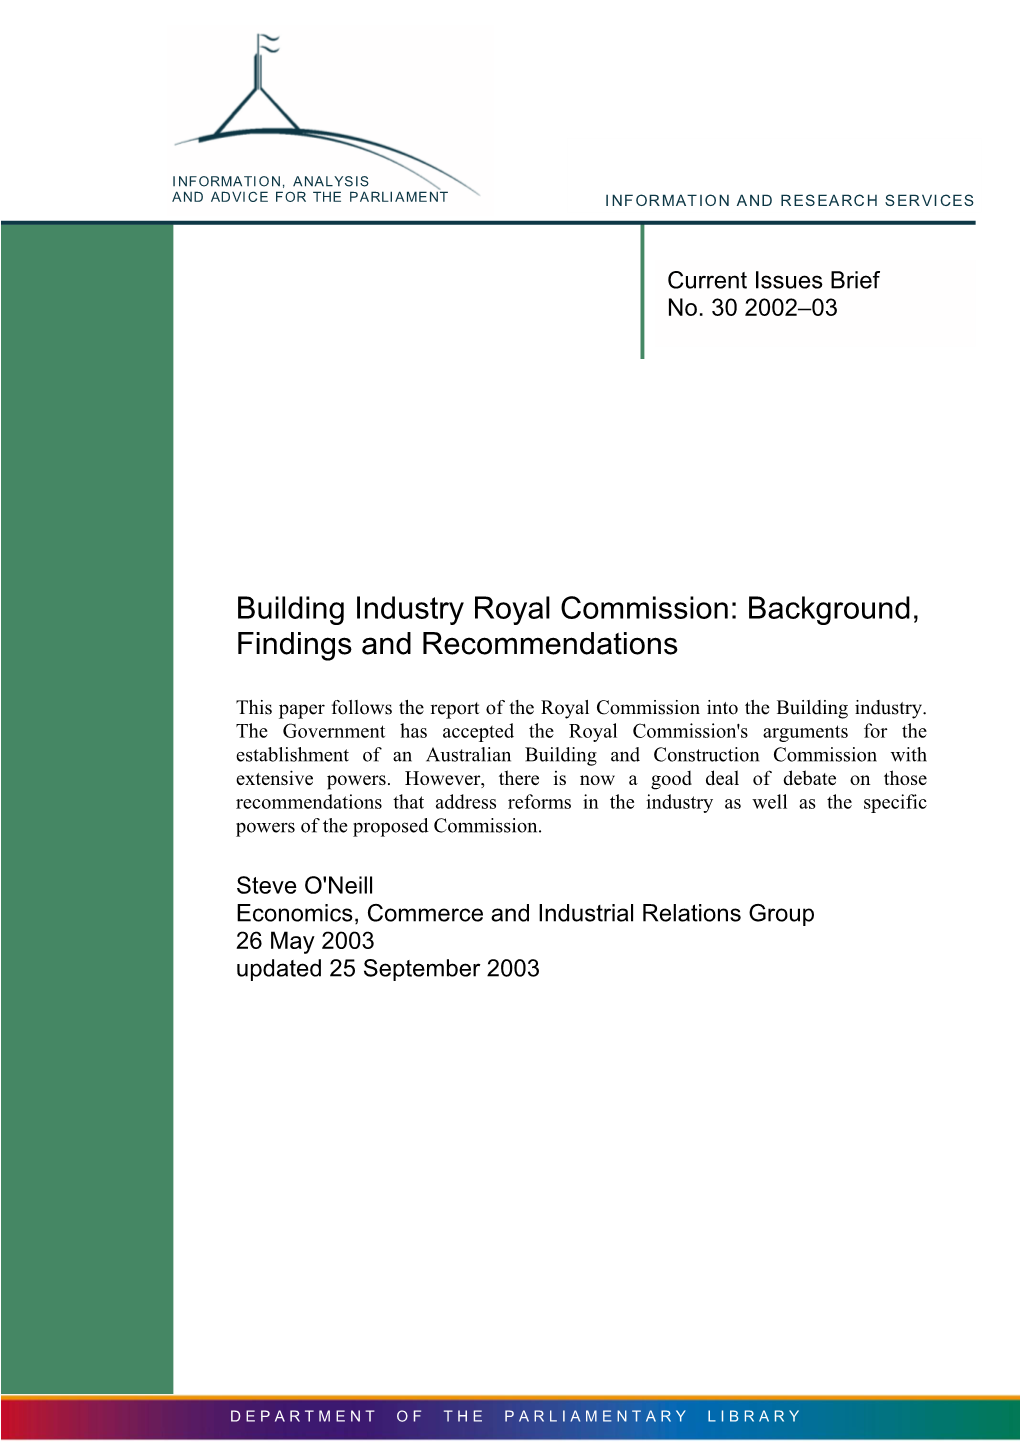 Building Industry Royal Commission: Background, Findings and Recommendations